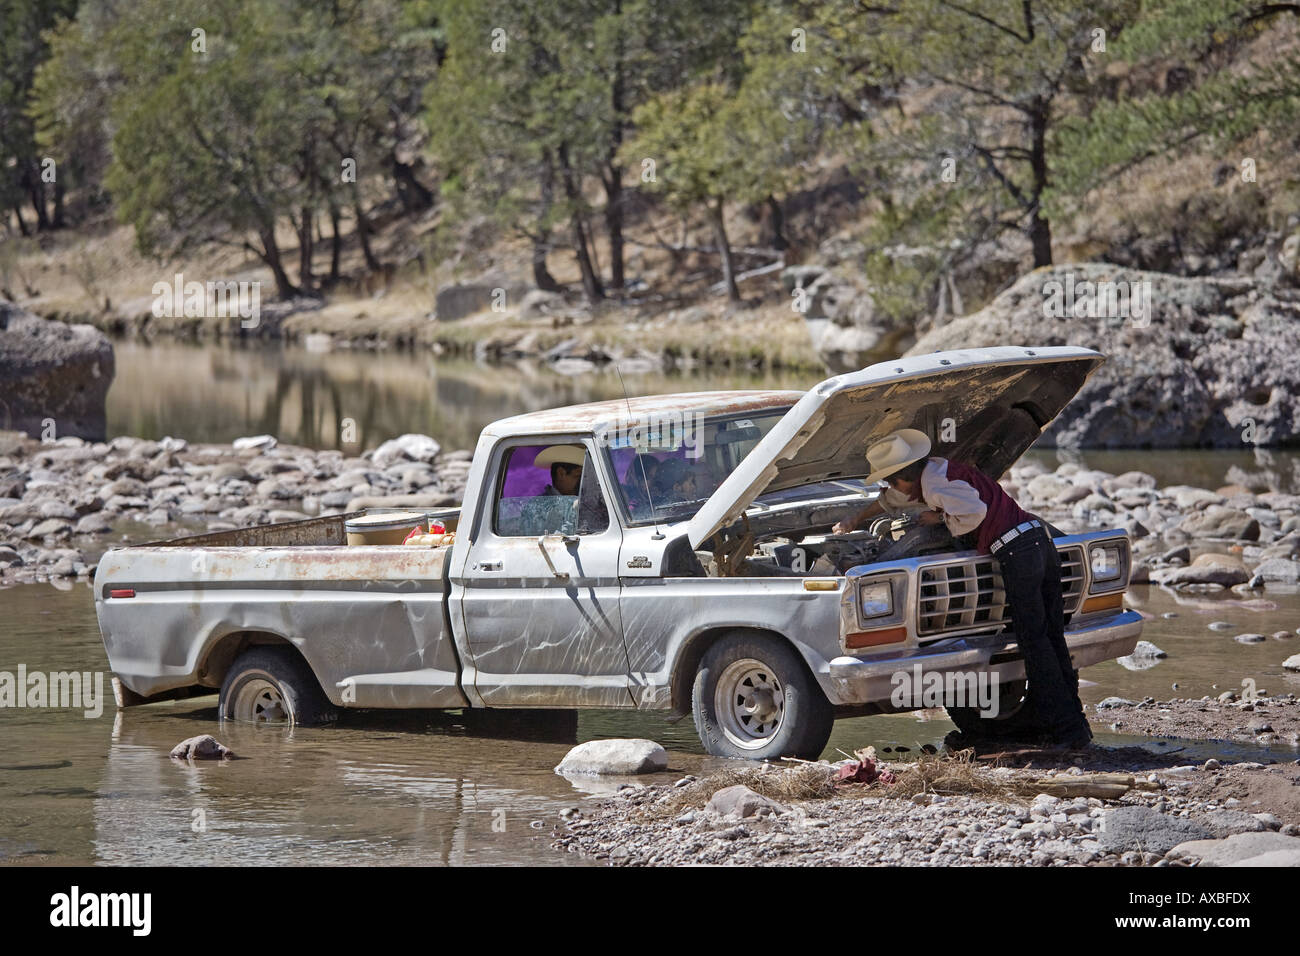 Carichi Mexico Man fixing his car engine in a middle of a river near Carichi Chihuahua State Stock Photo